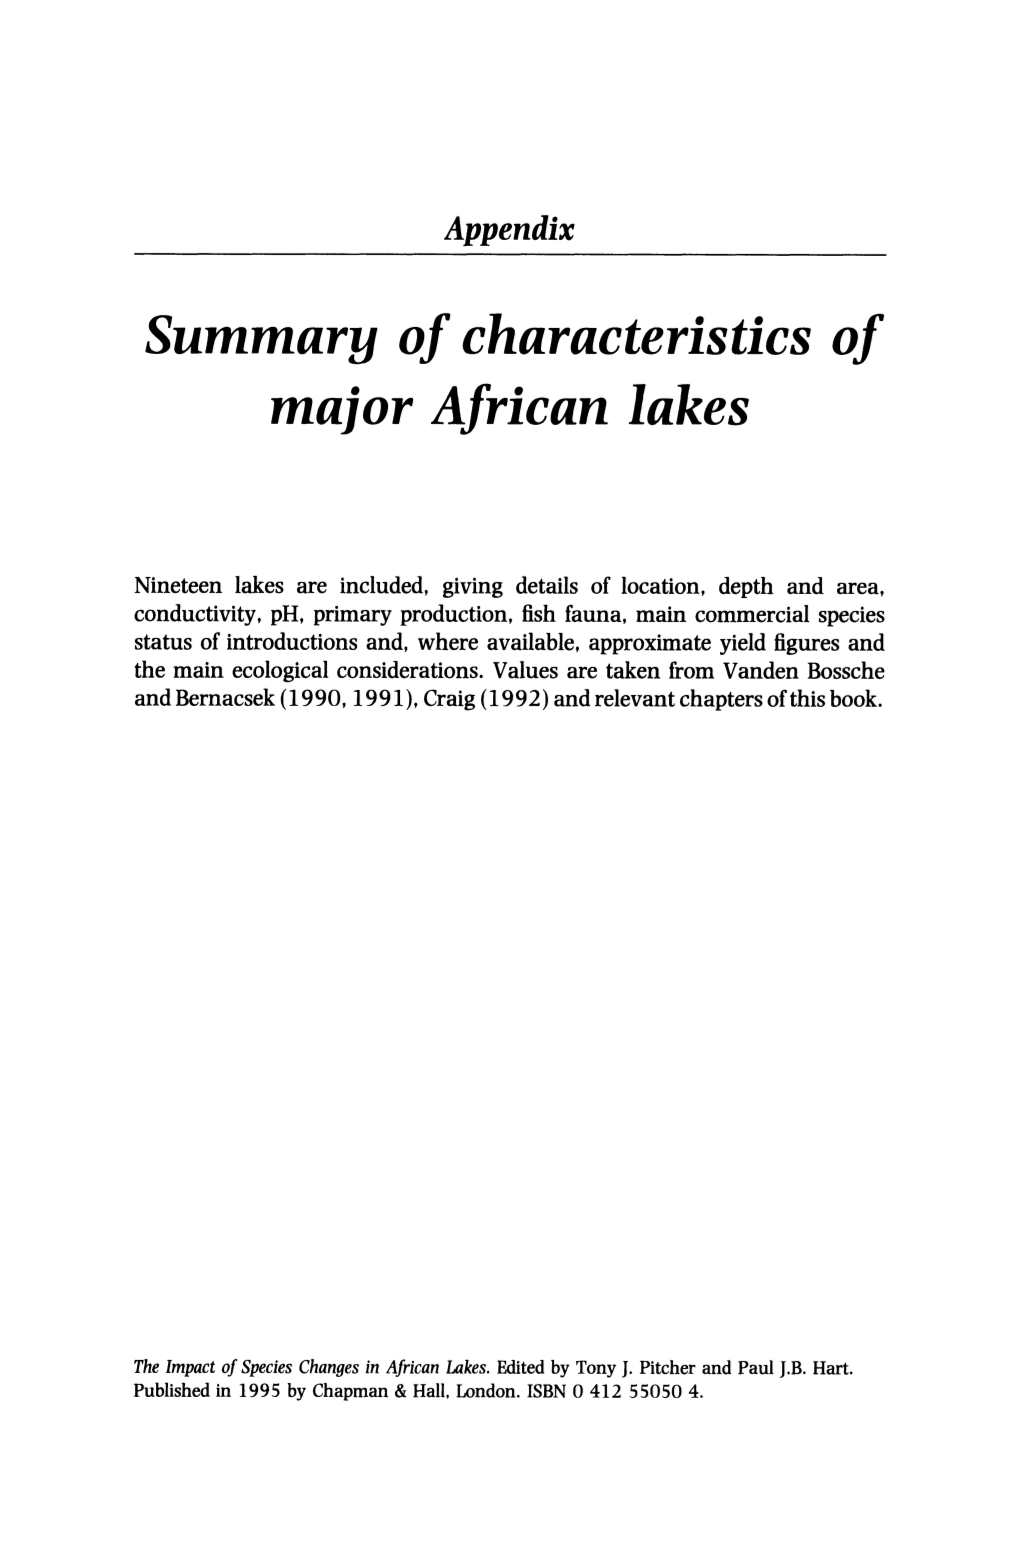 Summary of Characteristics of Major African Lakes